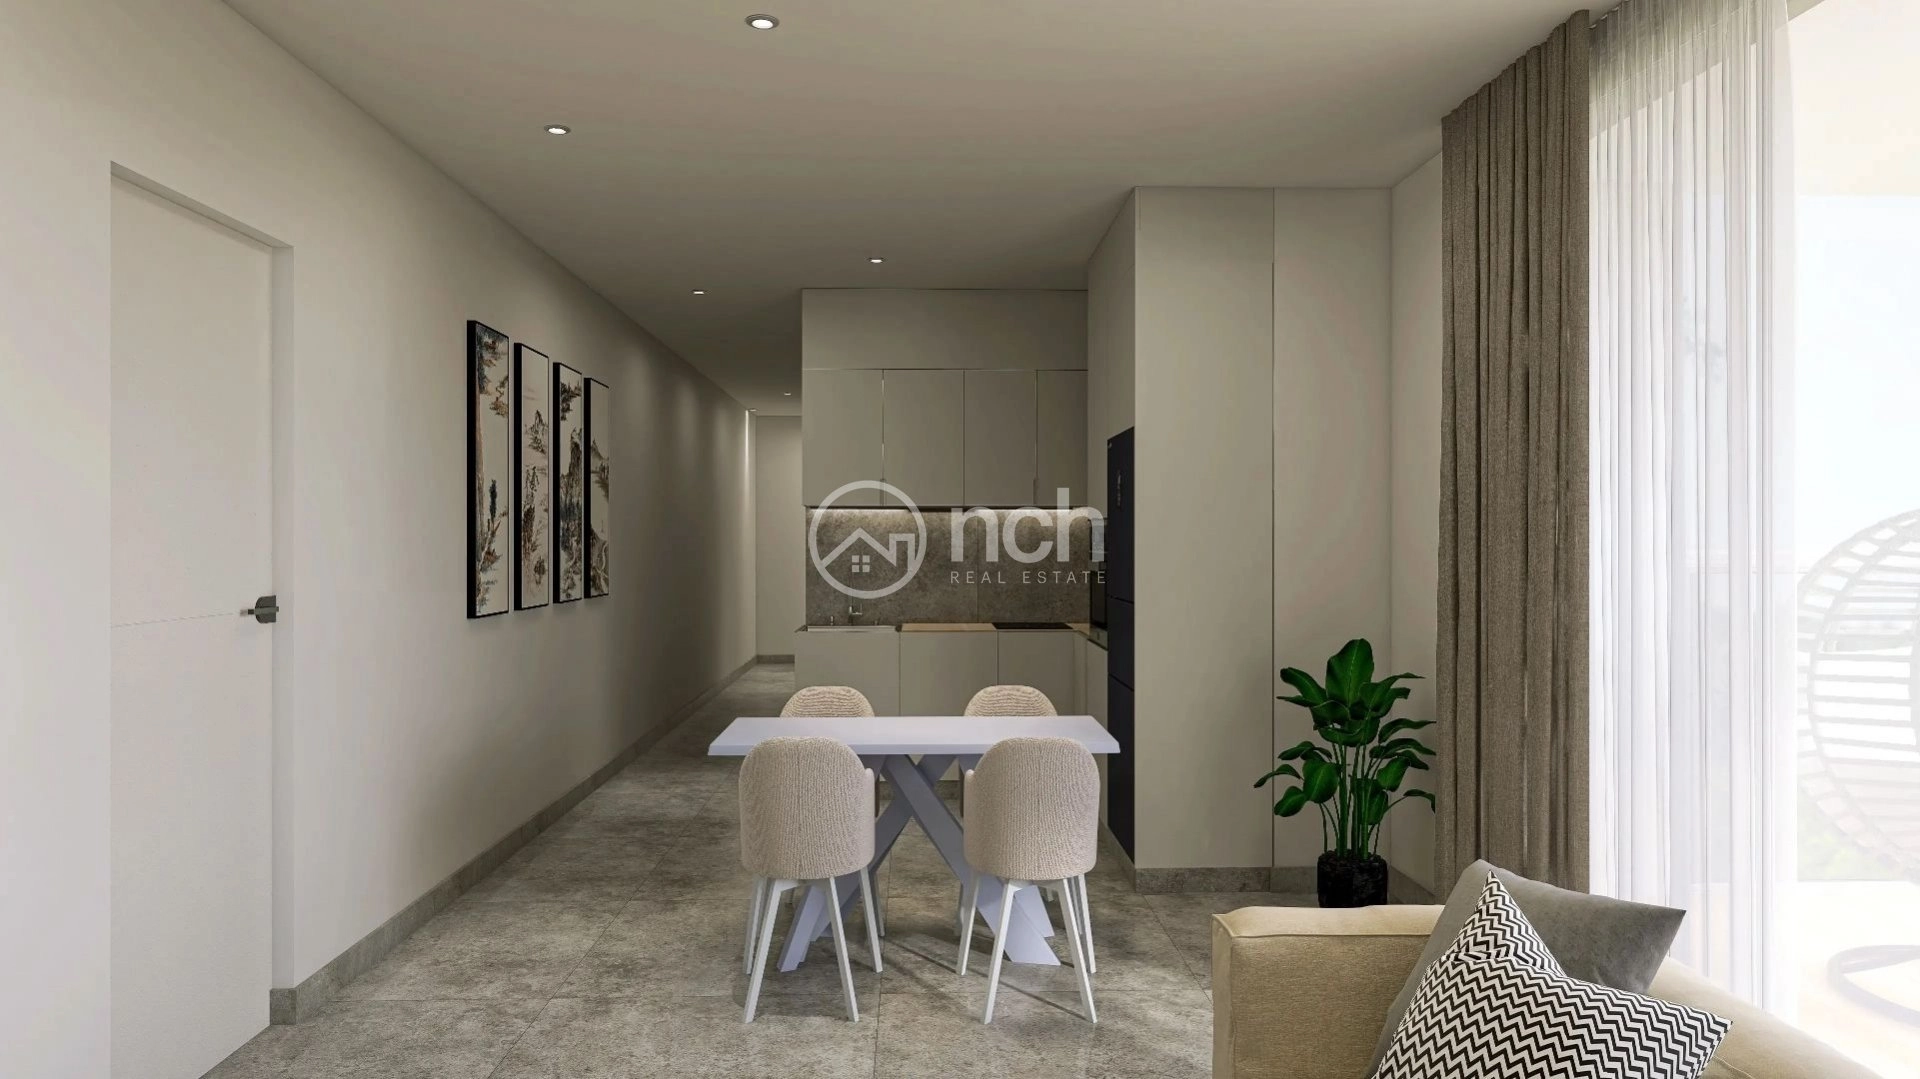 2 Bedroom Apartment for Sale in Kalithea, Nicosia District